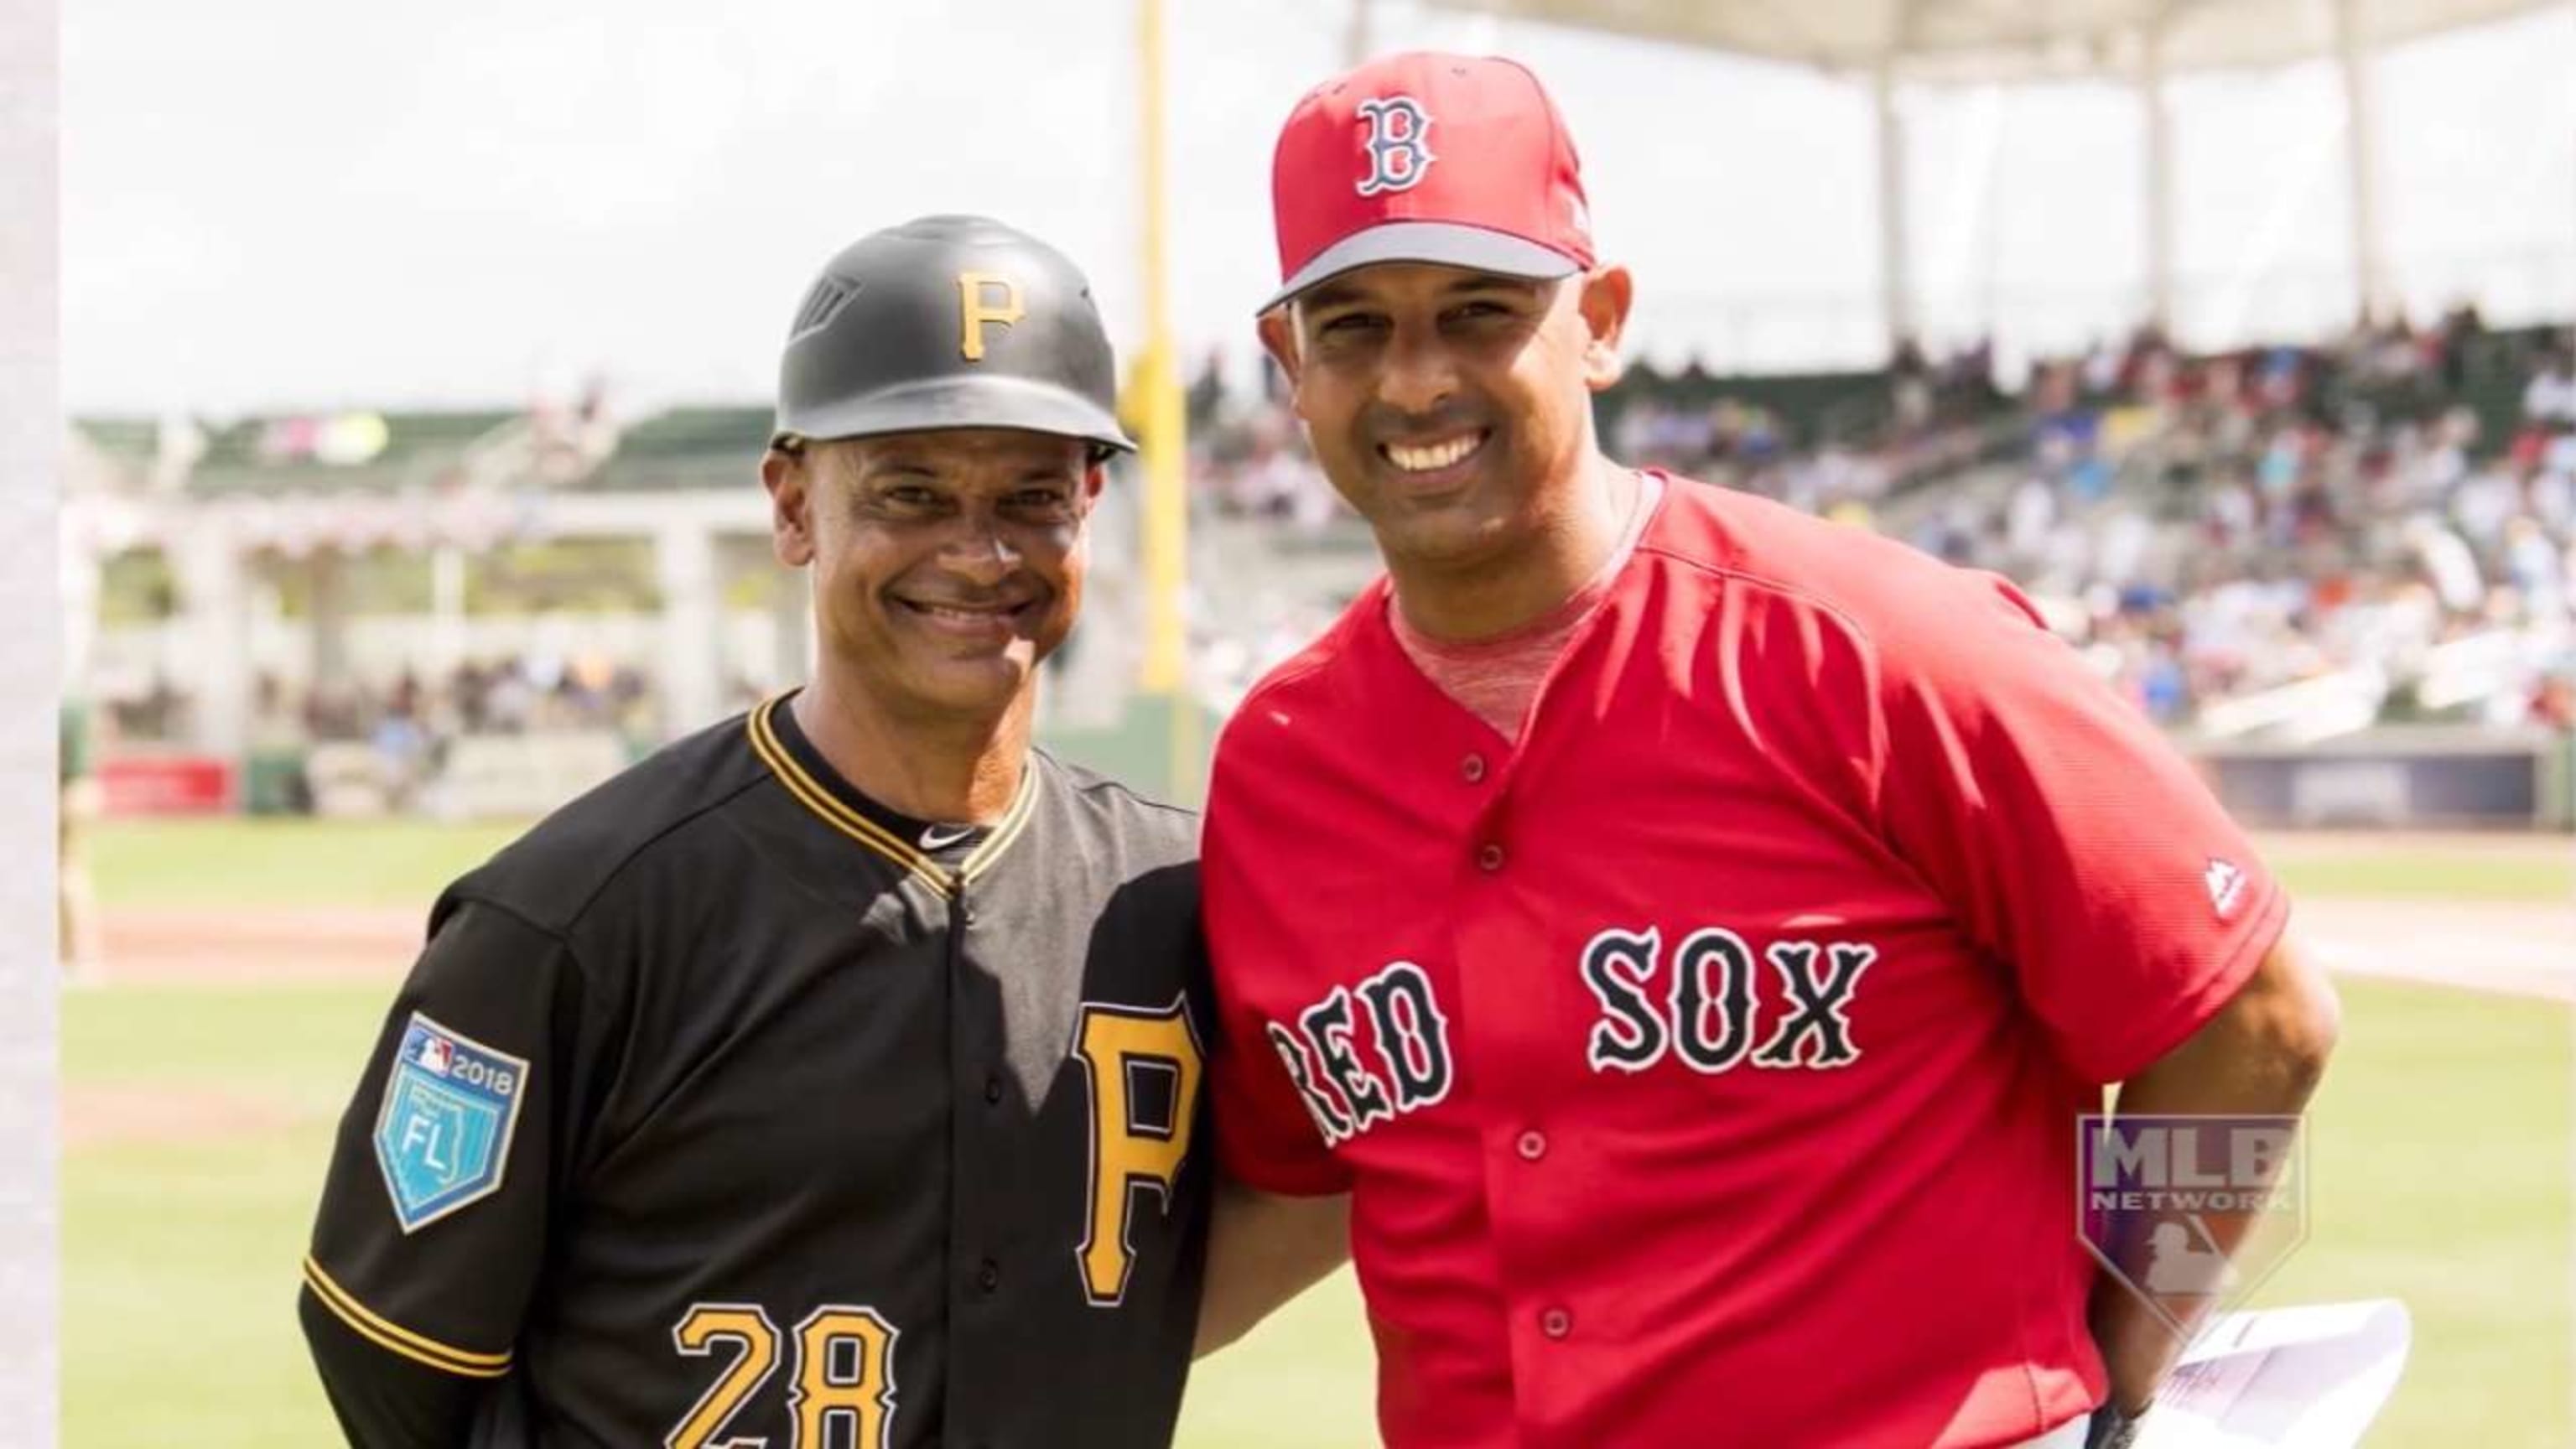 Joey Cora is a father figure to Alex Cora